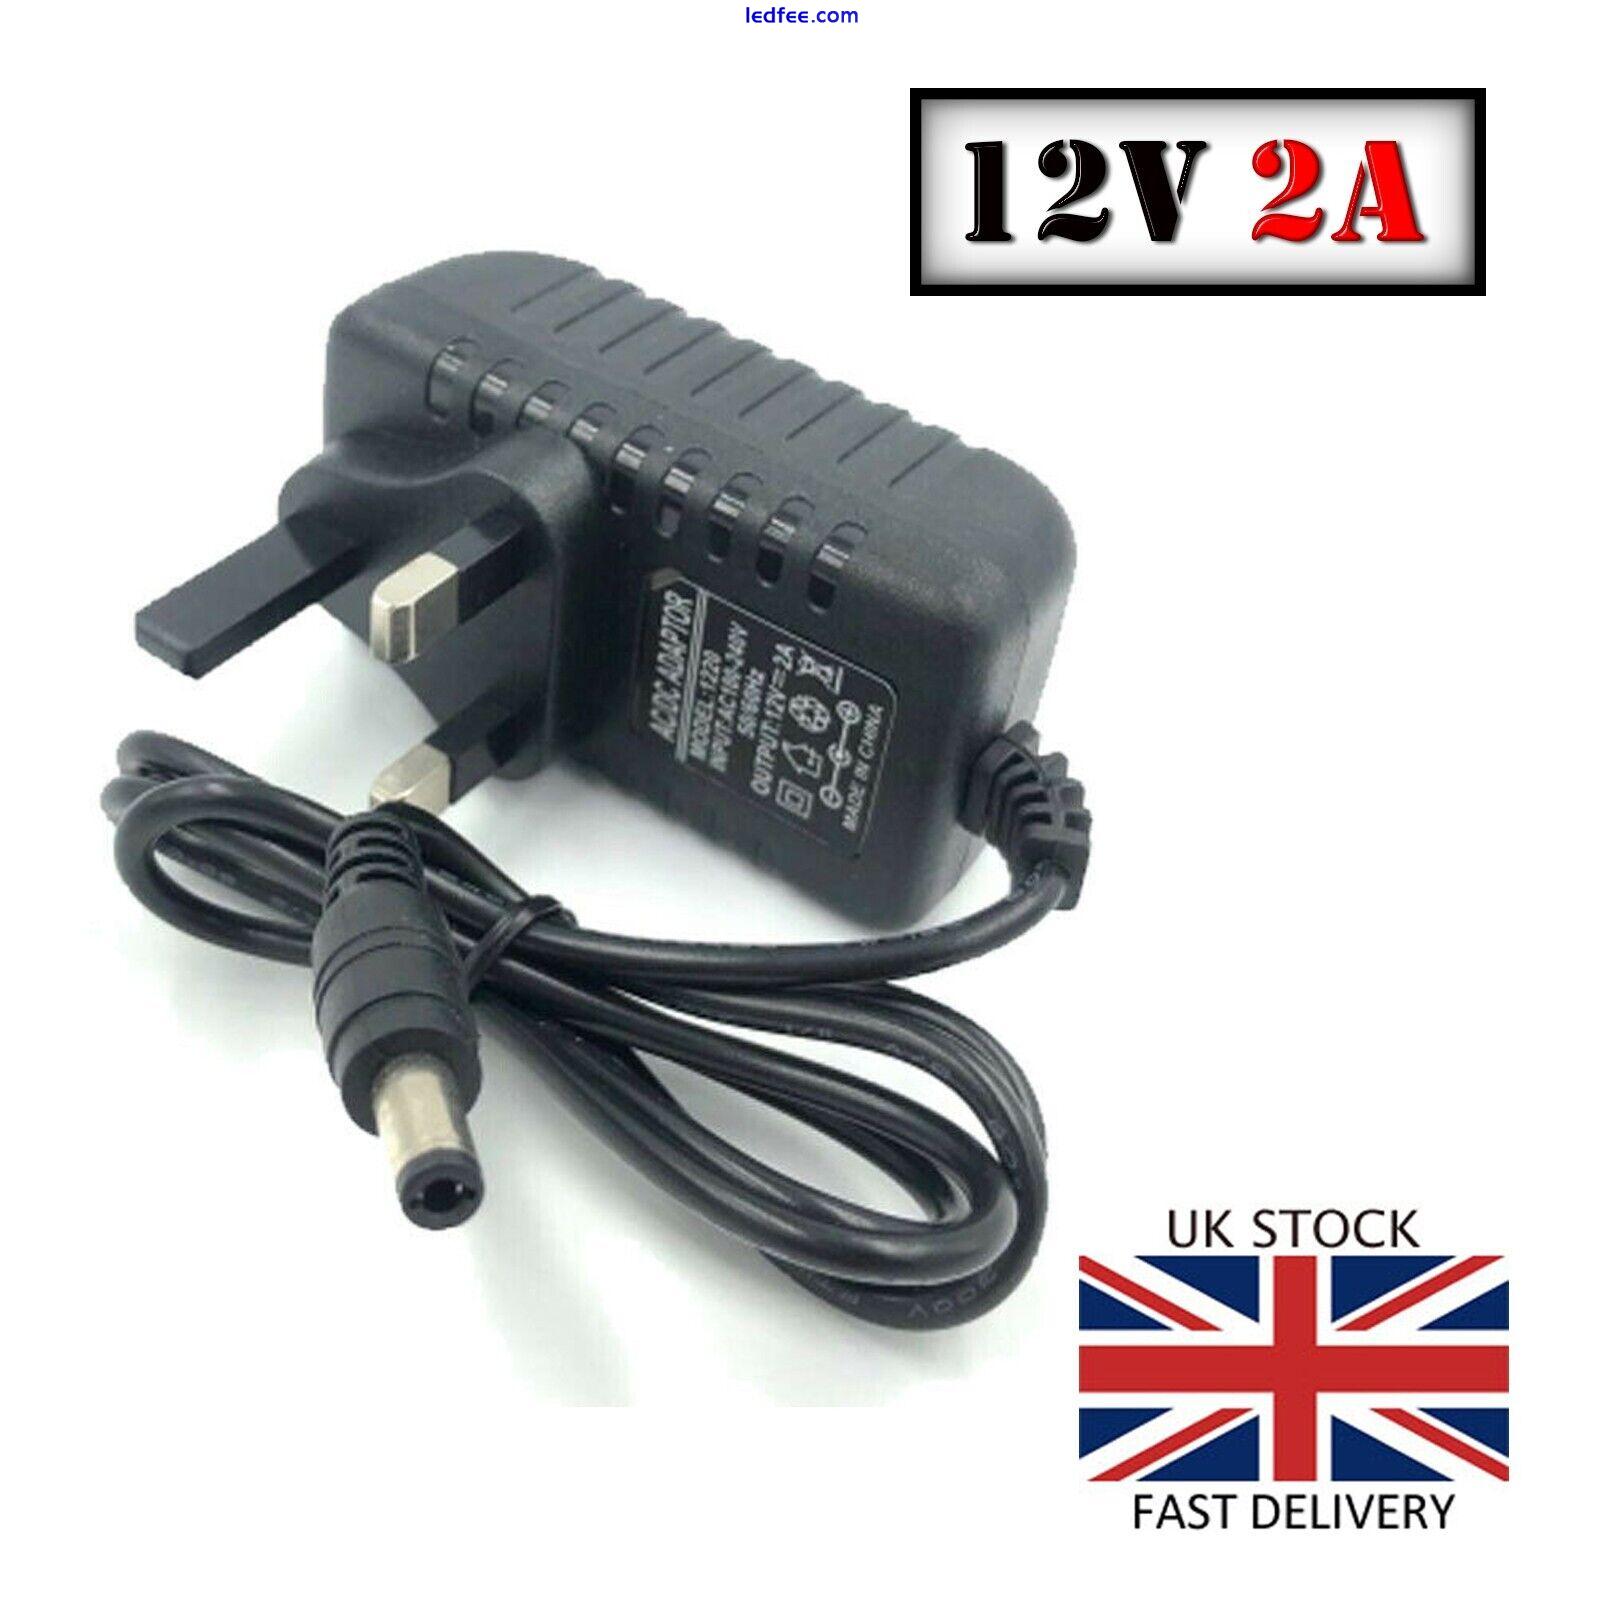 10 x 2A AC/DC UK Power Supply Adapter Safety Charger For LED Strip CCTV Camera 4 